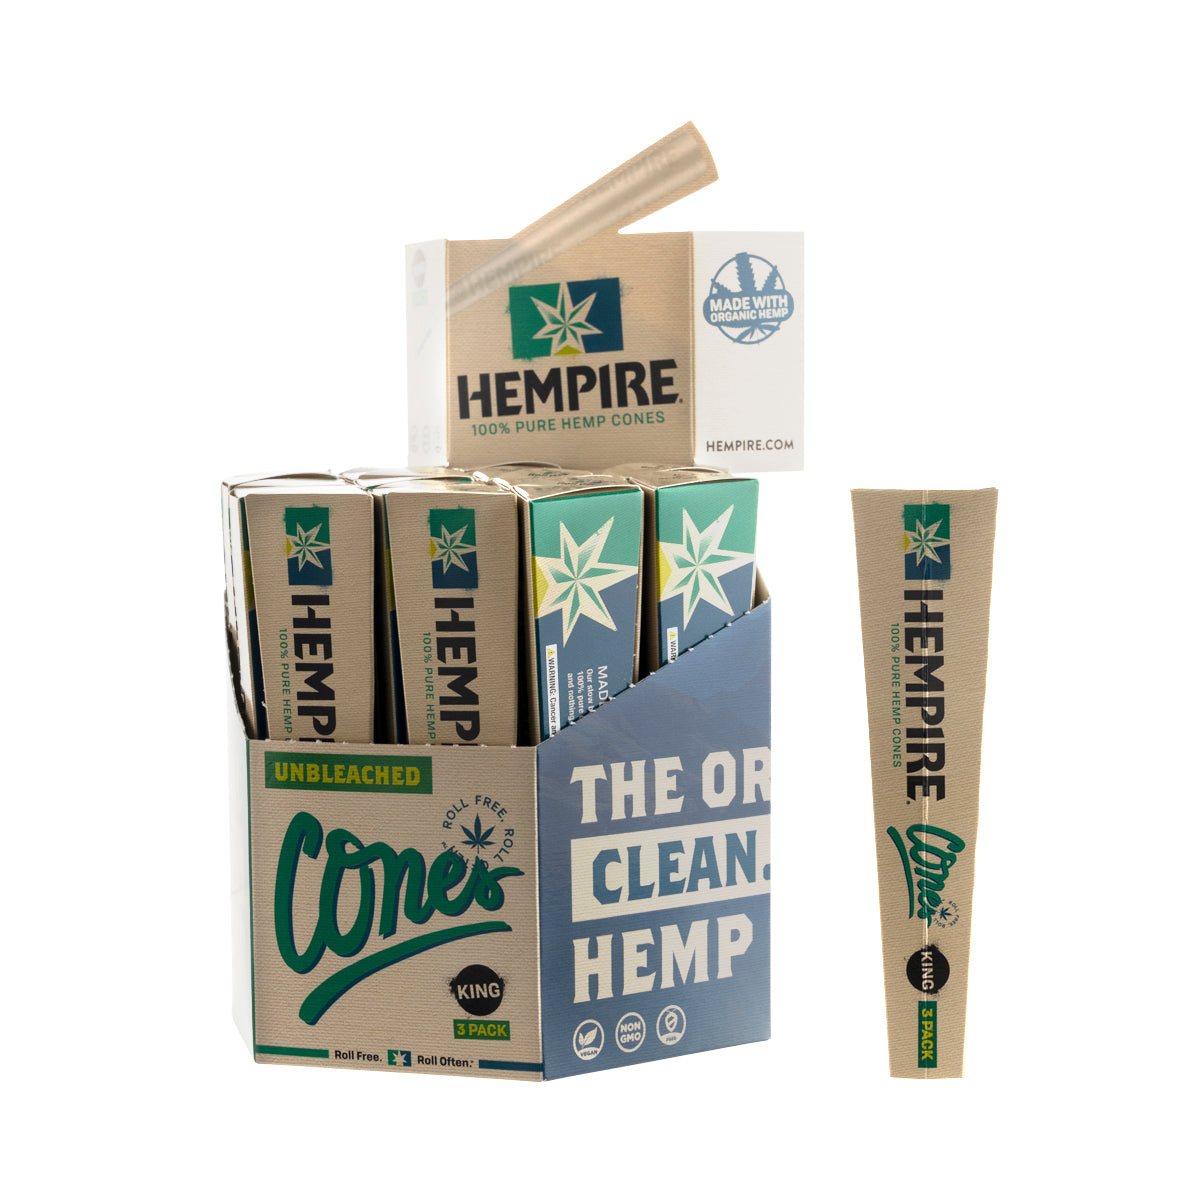 HEMPIRE UNBLEACHED CONES KING SIZE - 3/24 CT